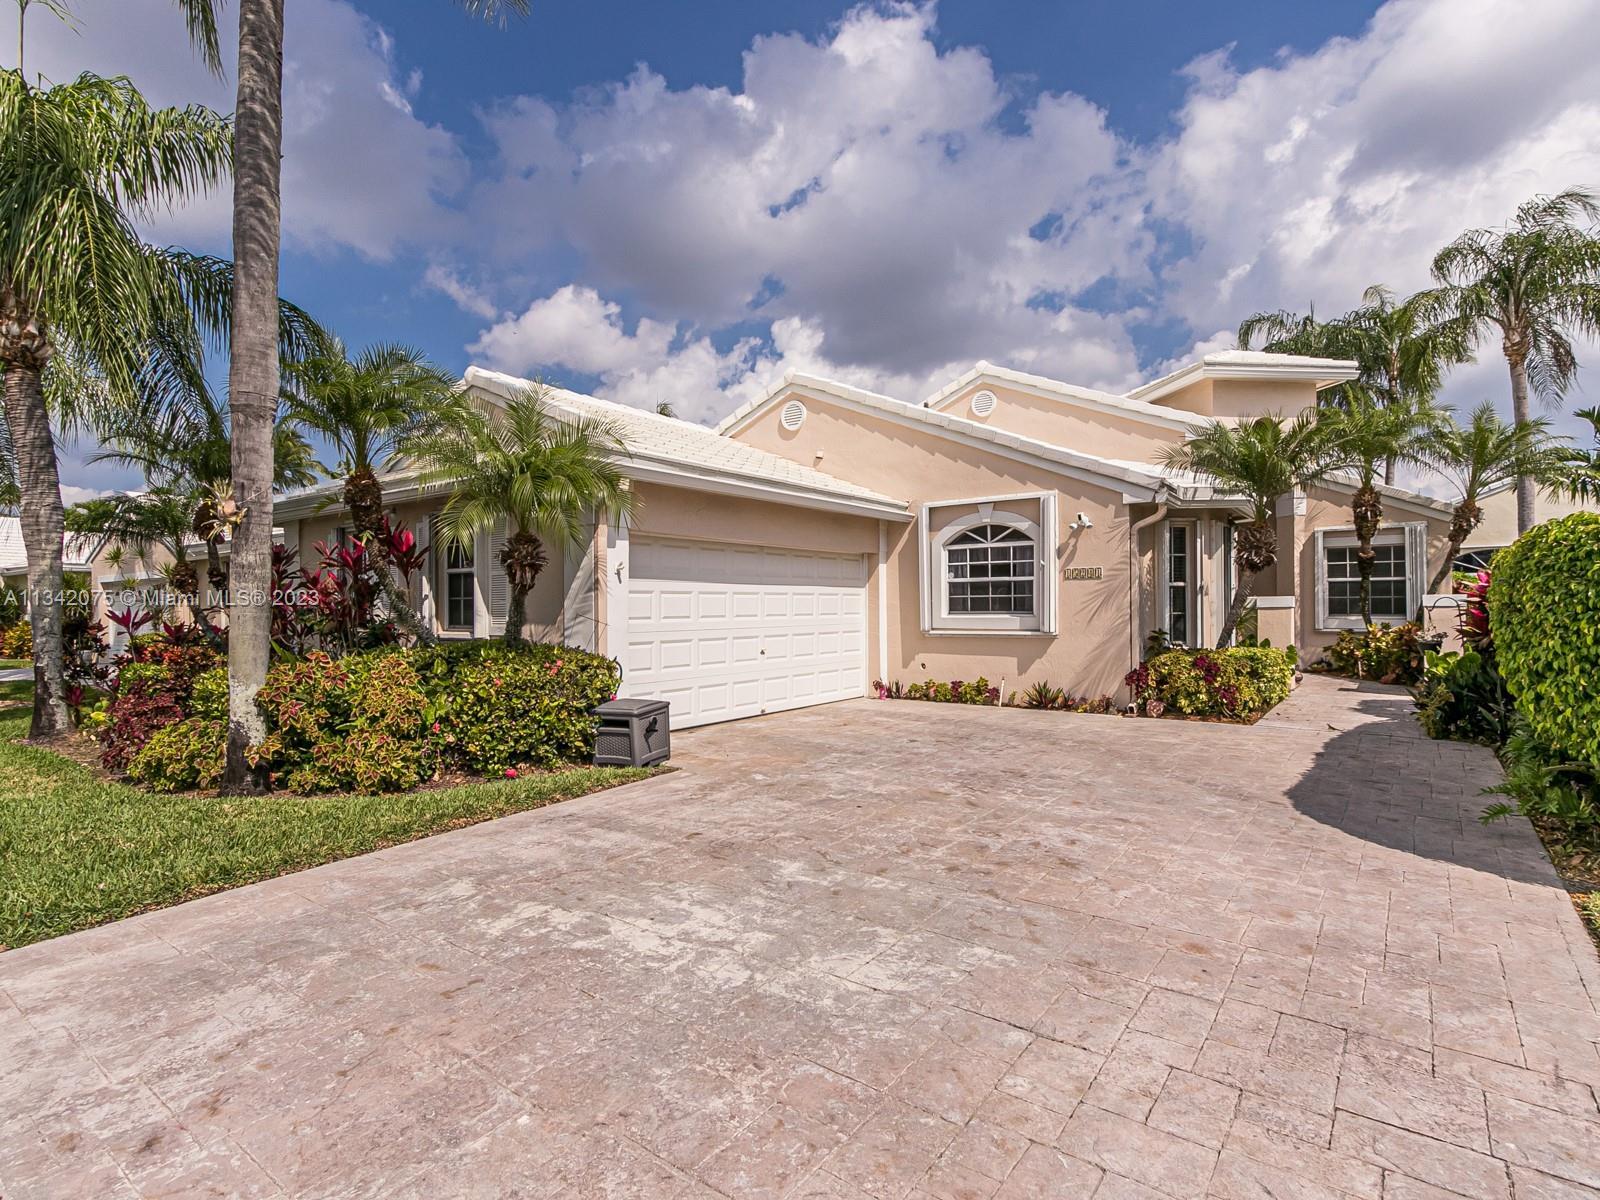 Awesome opportunity to live in beautiful Grand Palms HOA and  Golf Course Community in South Broward